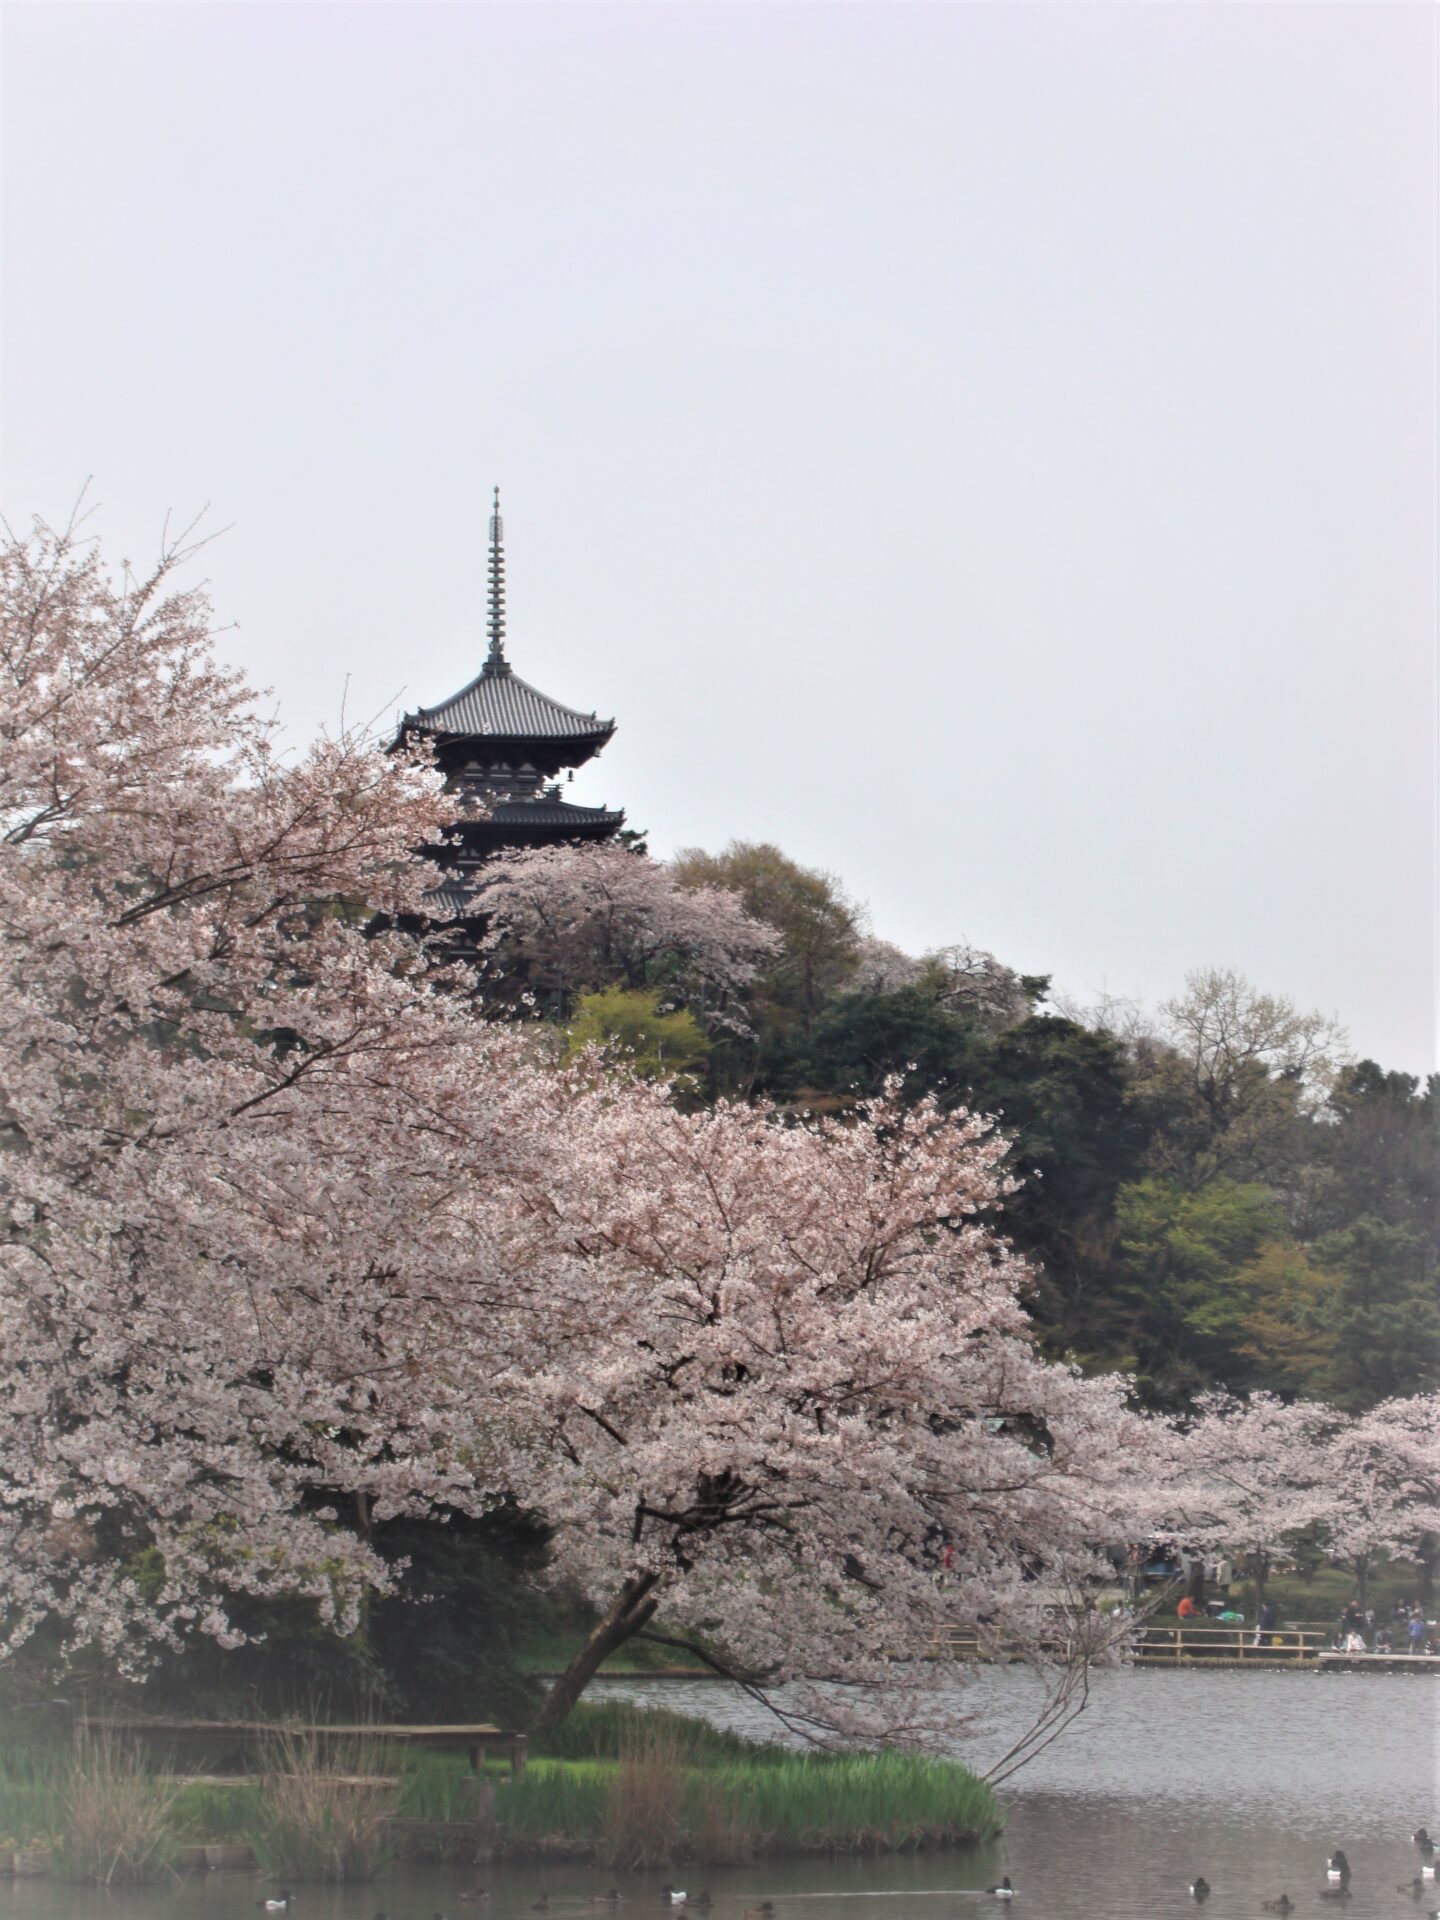 Japan Weather Association announced Cherry Blossom Bloom and Full Bloom Forecasts for 2023